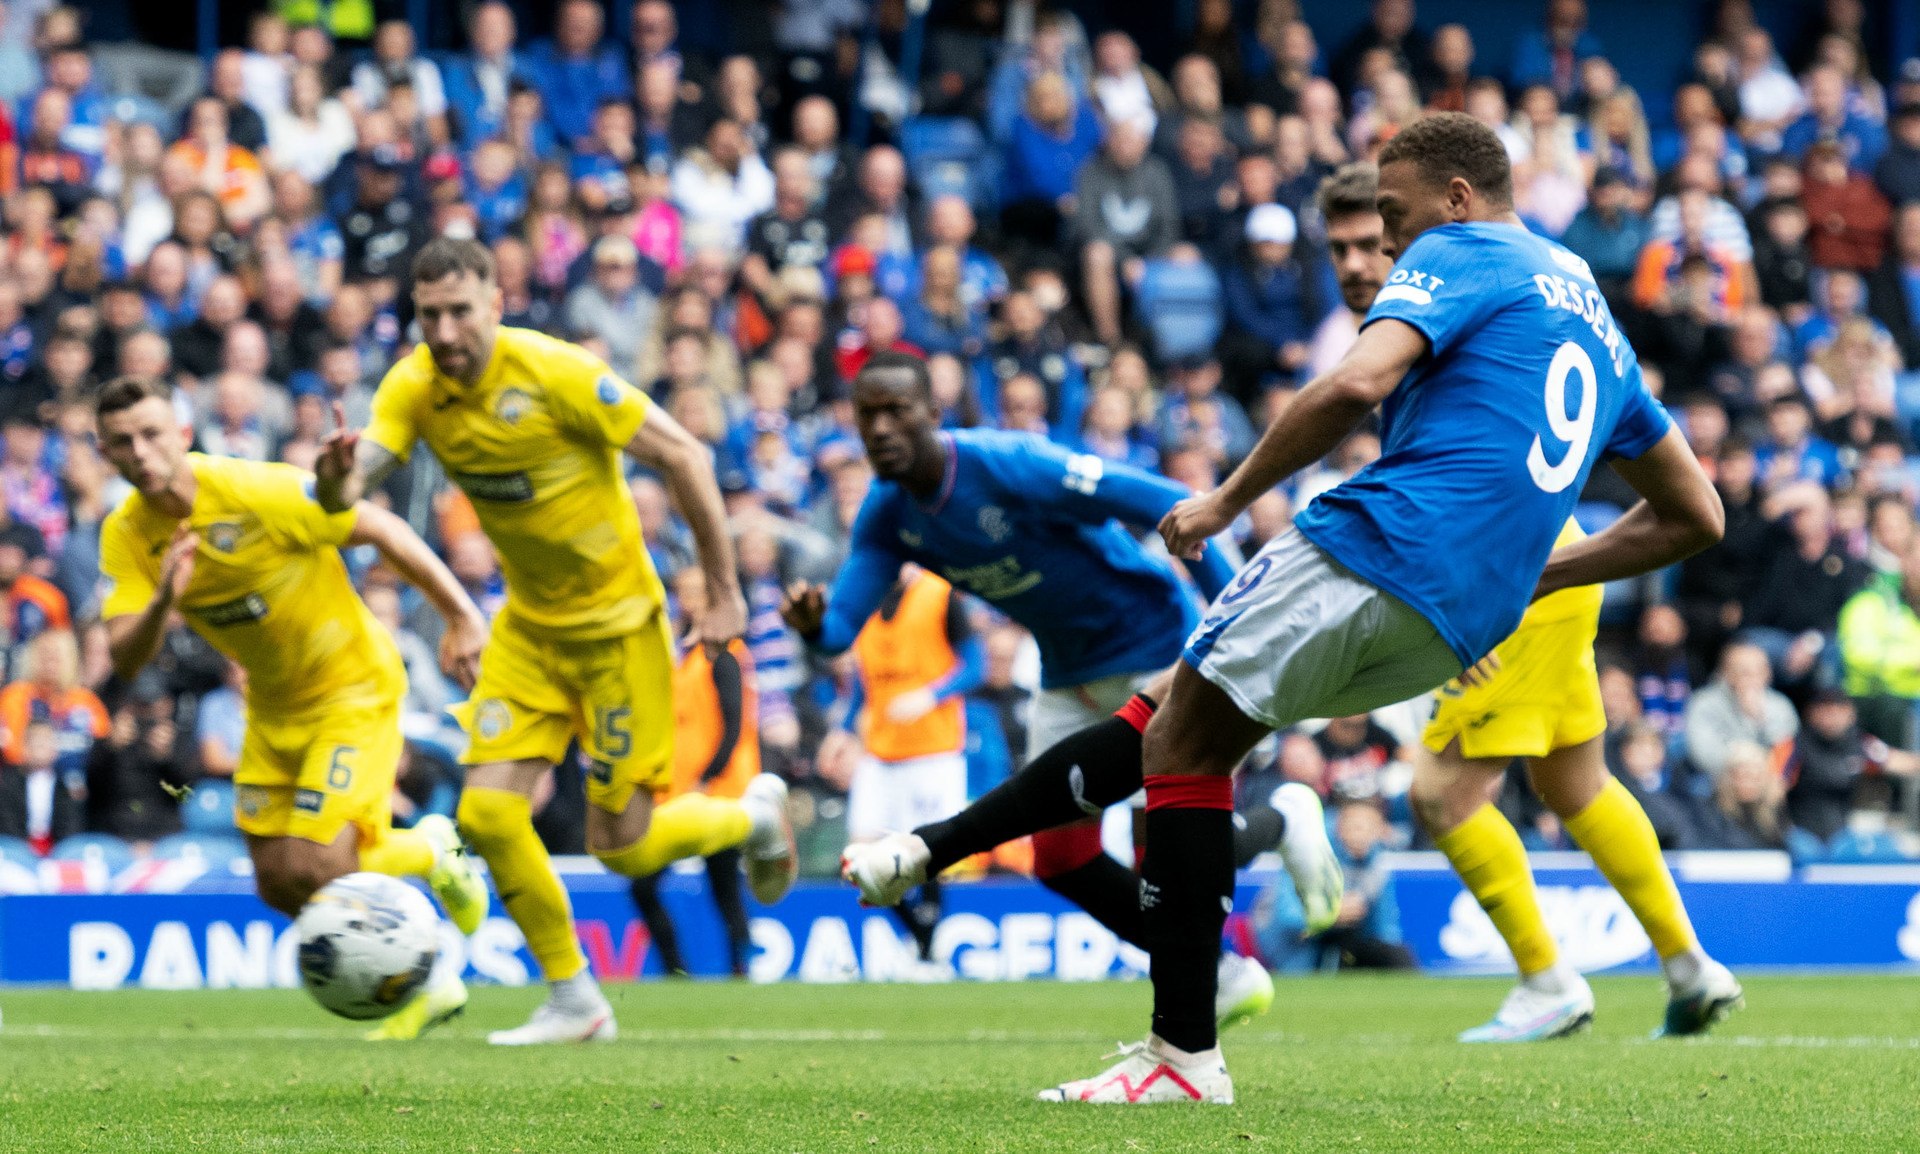 Cyriel Dessers scored to make it 1-1 during the match between Rangers and Greenock Morton at Ibrox.